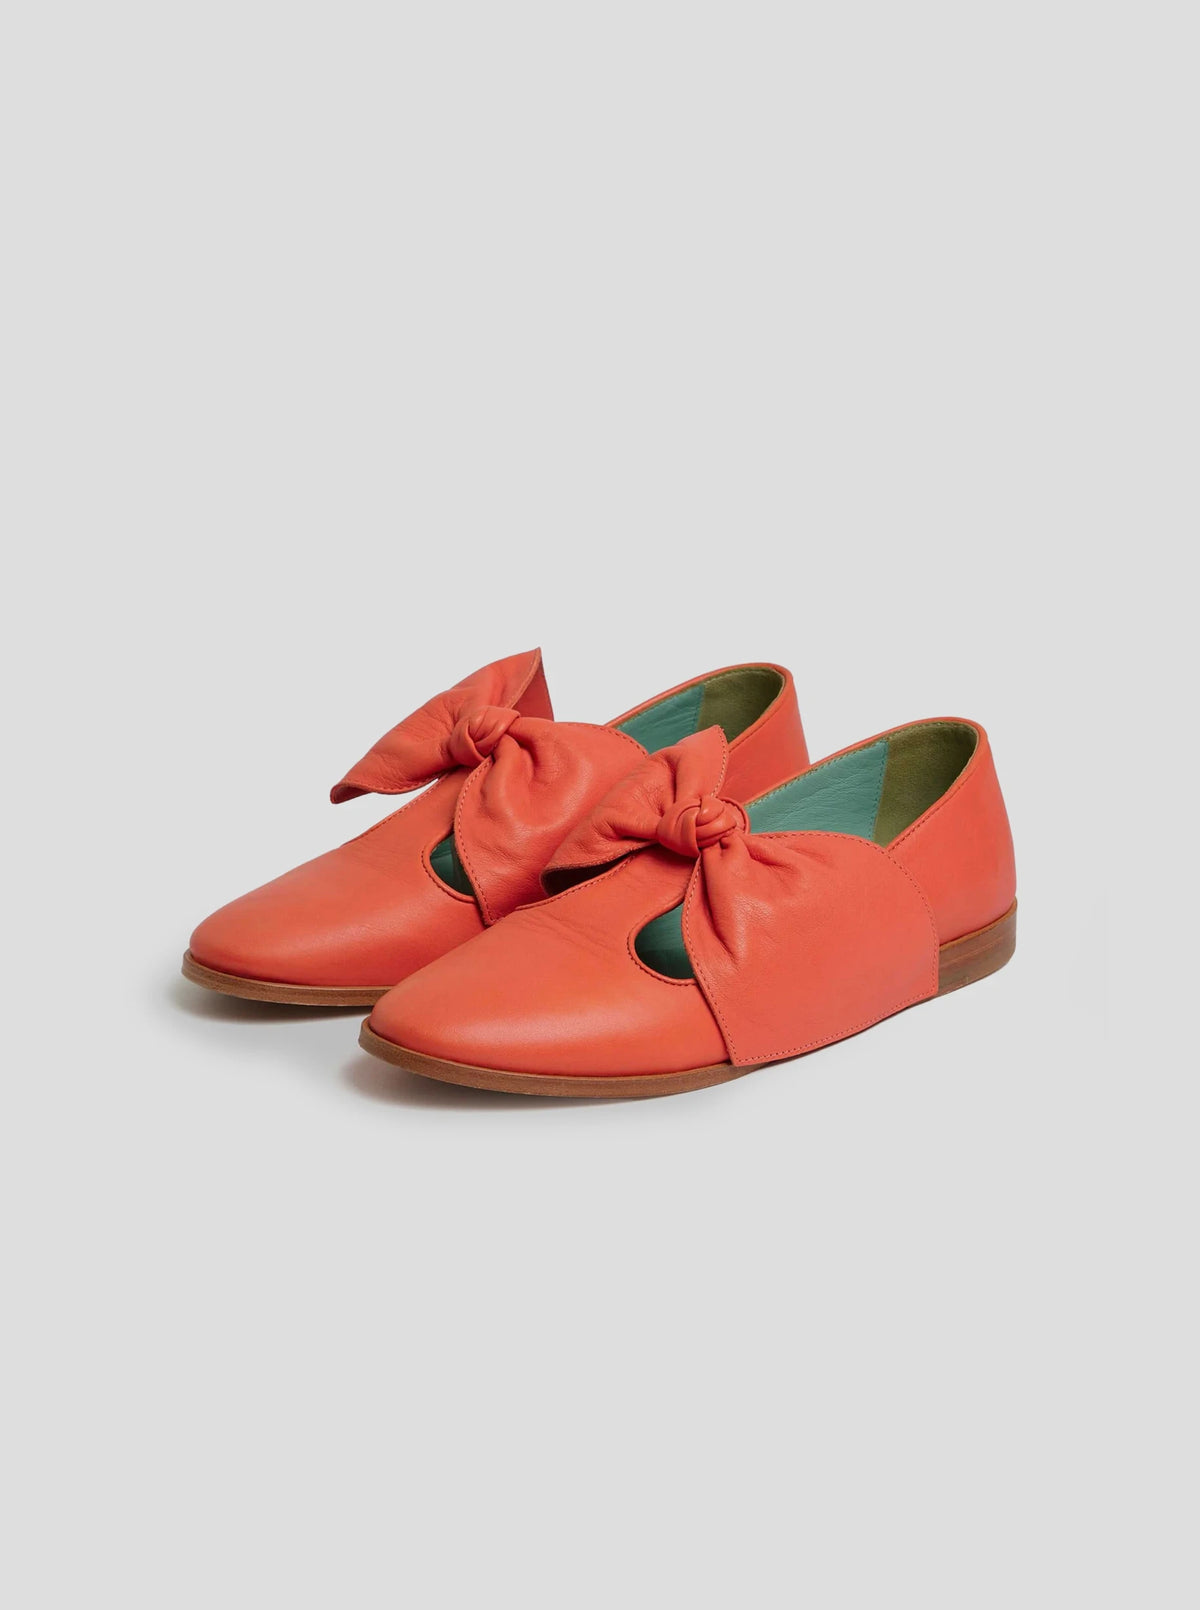 BB Ballerina Shoes in Salmon Leather